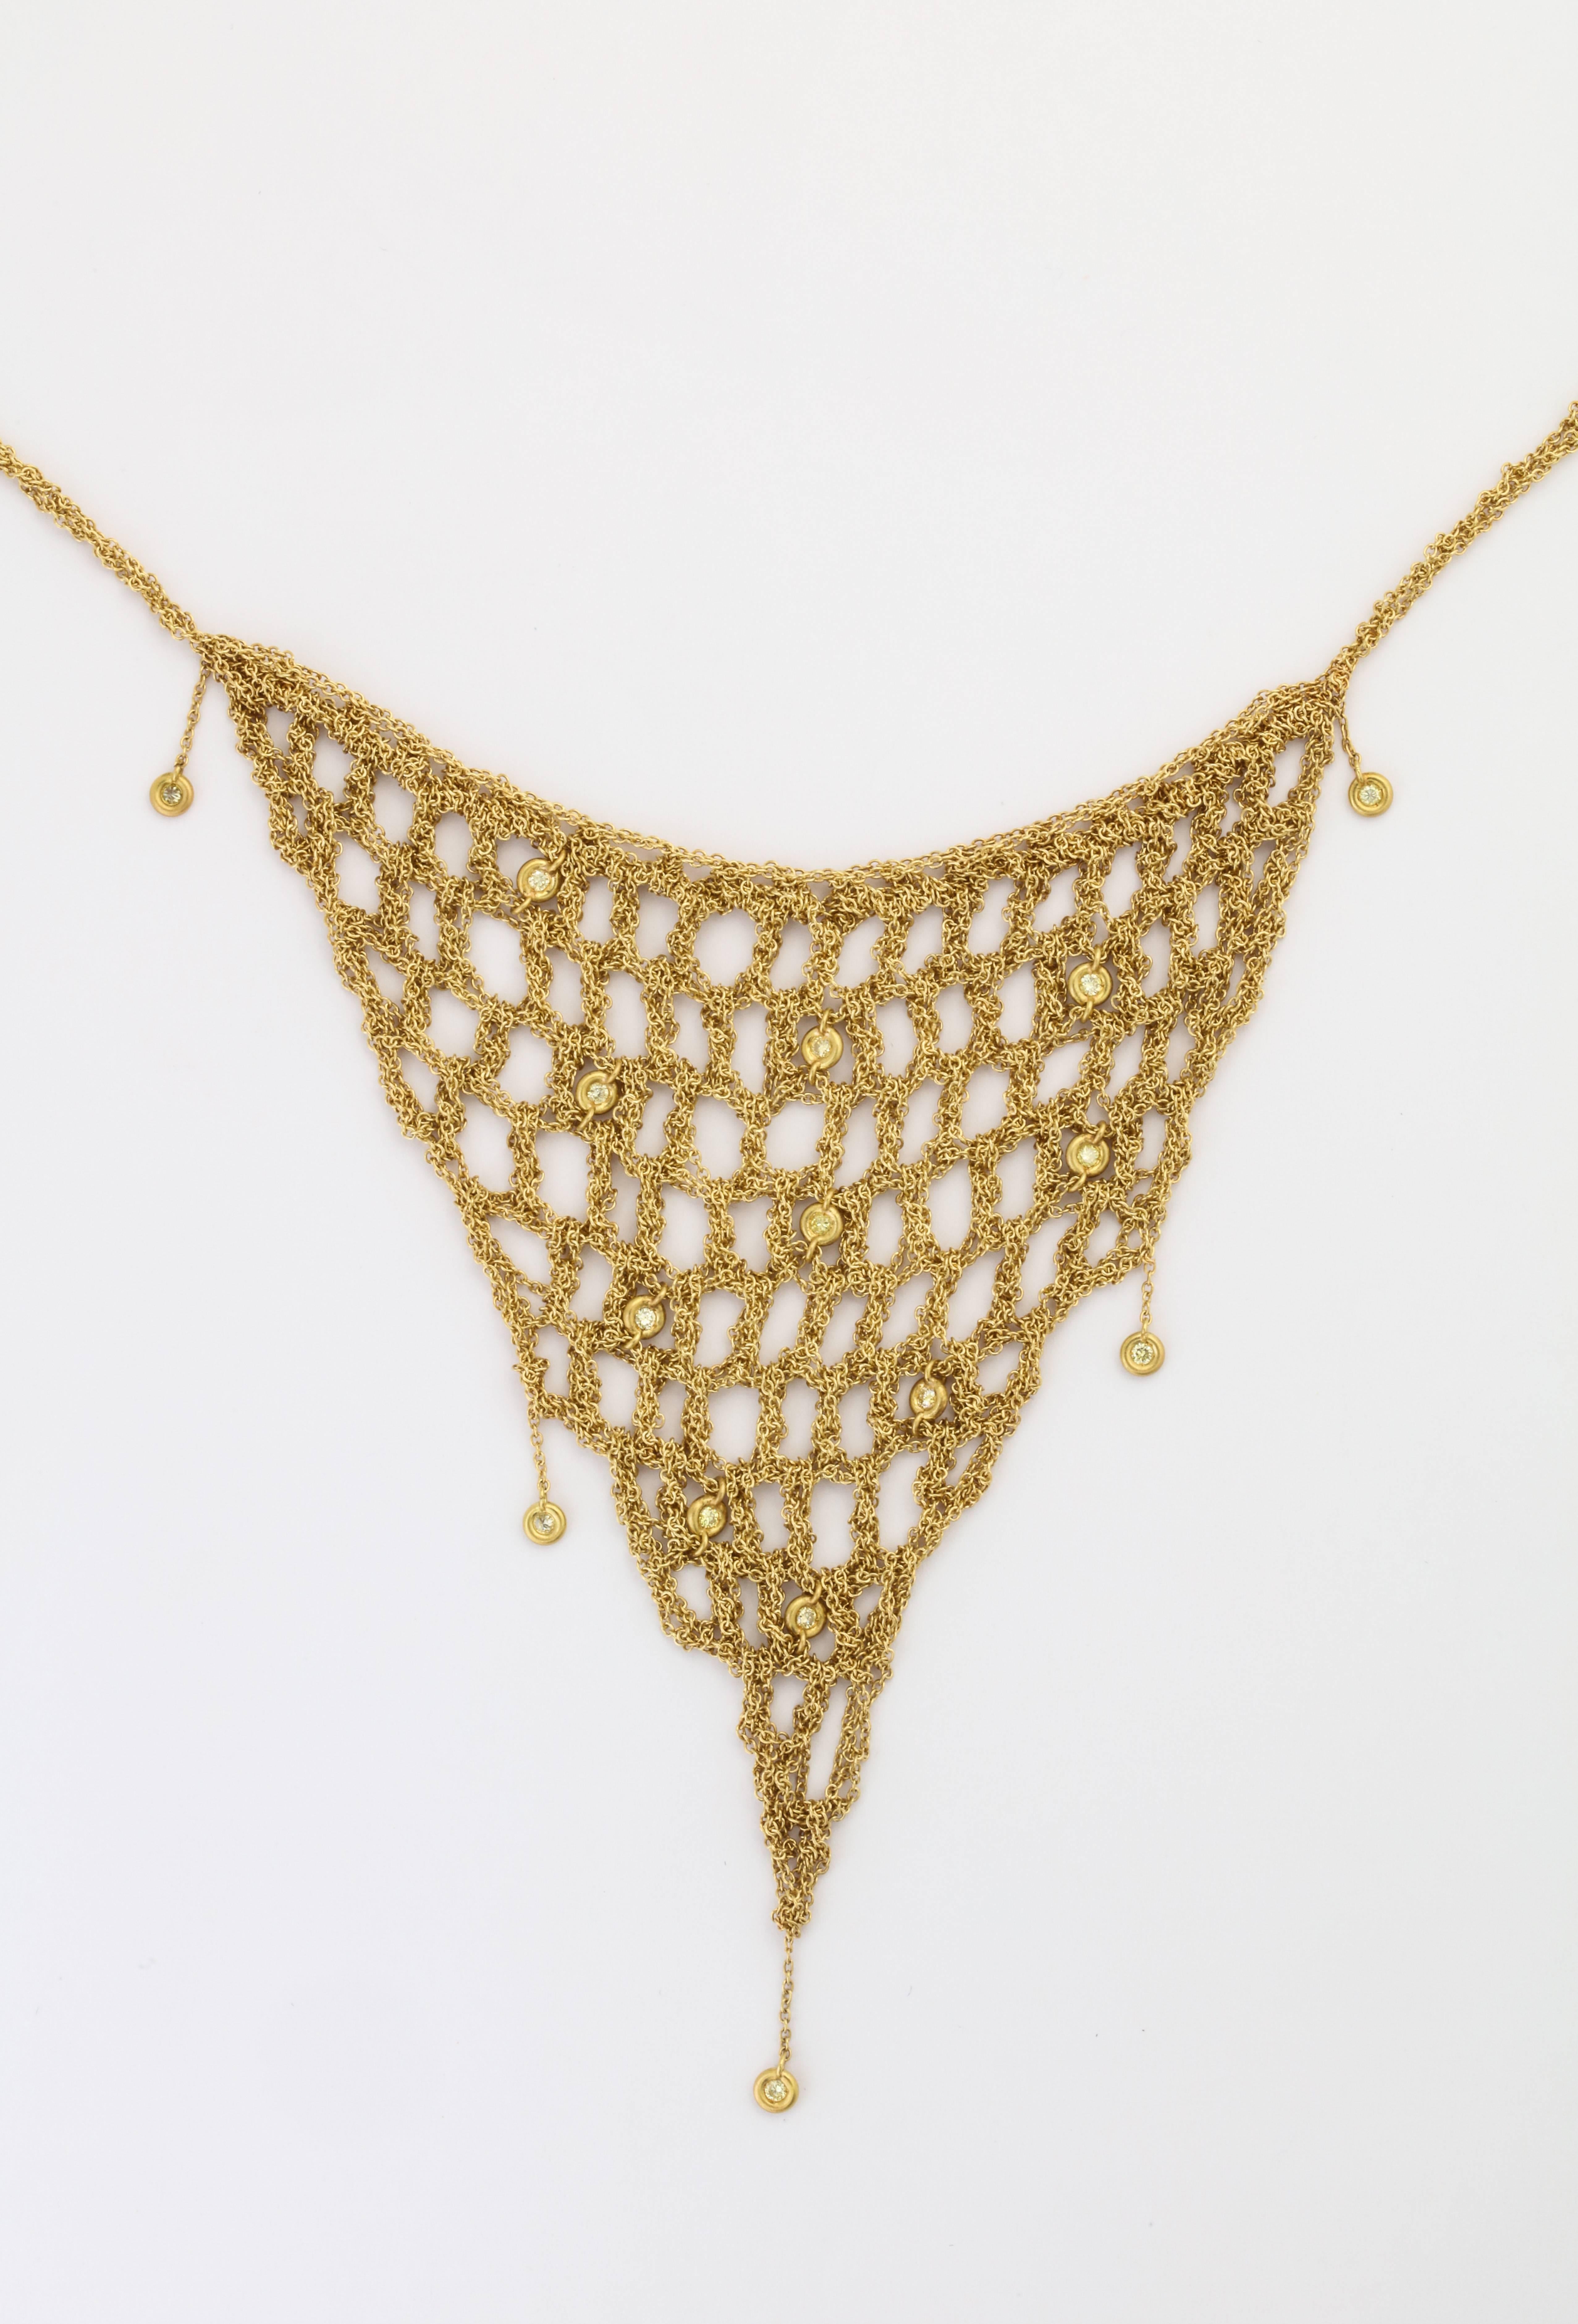 H Stern Diamond and Gold Mesh Necklace 4